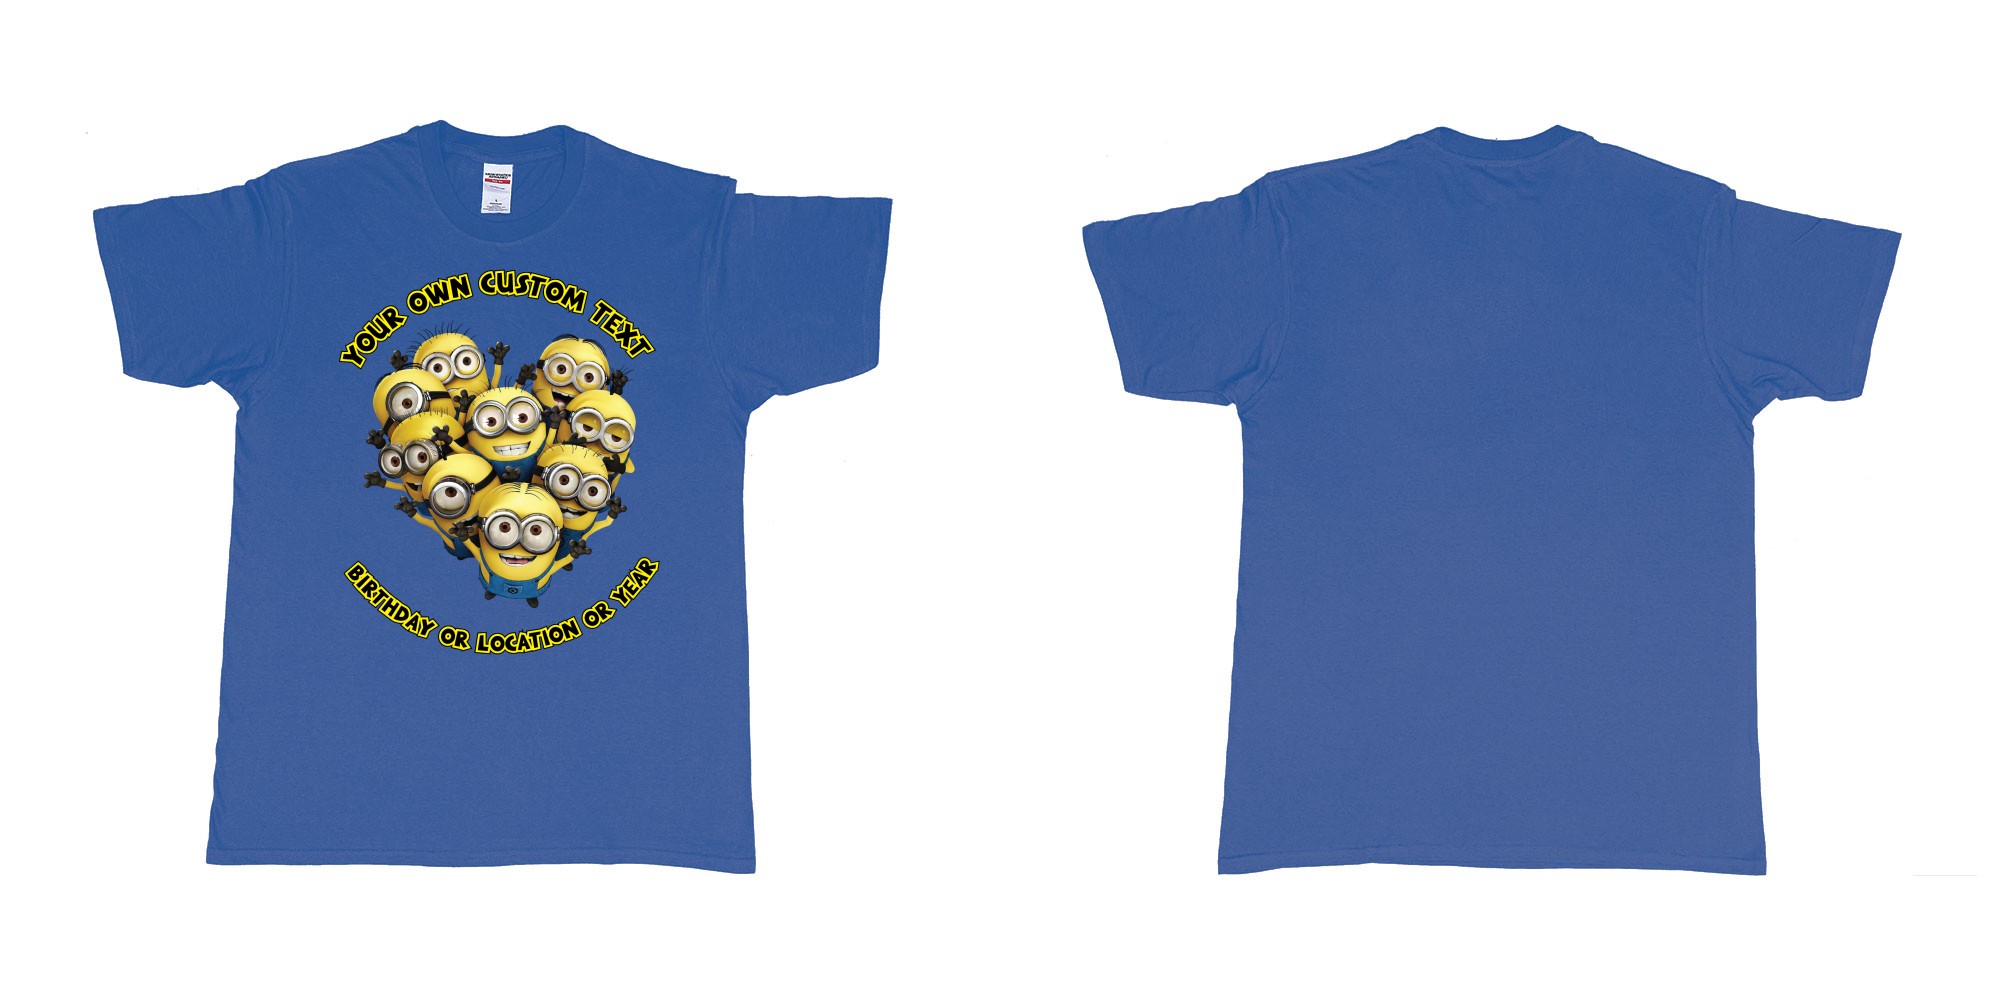 Custom tshirt design minions celebrating you in fabric color royal-blue choice your own text made in Bali by The Pirate Way